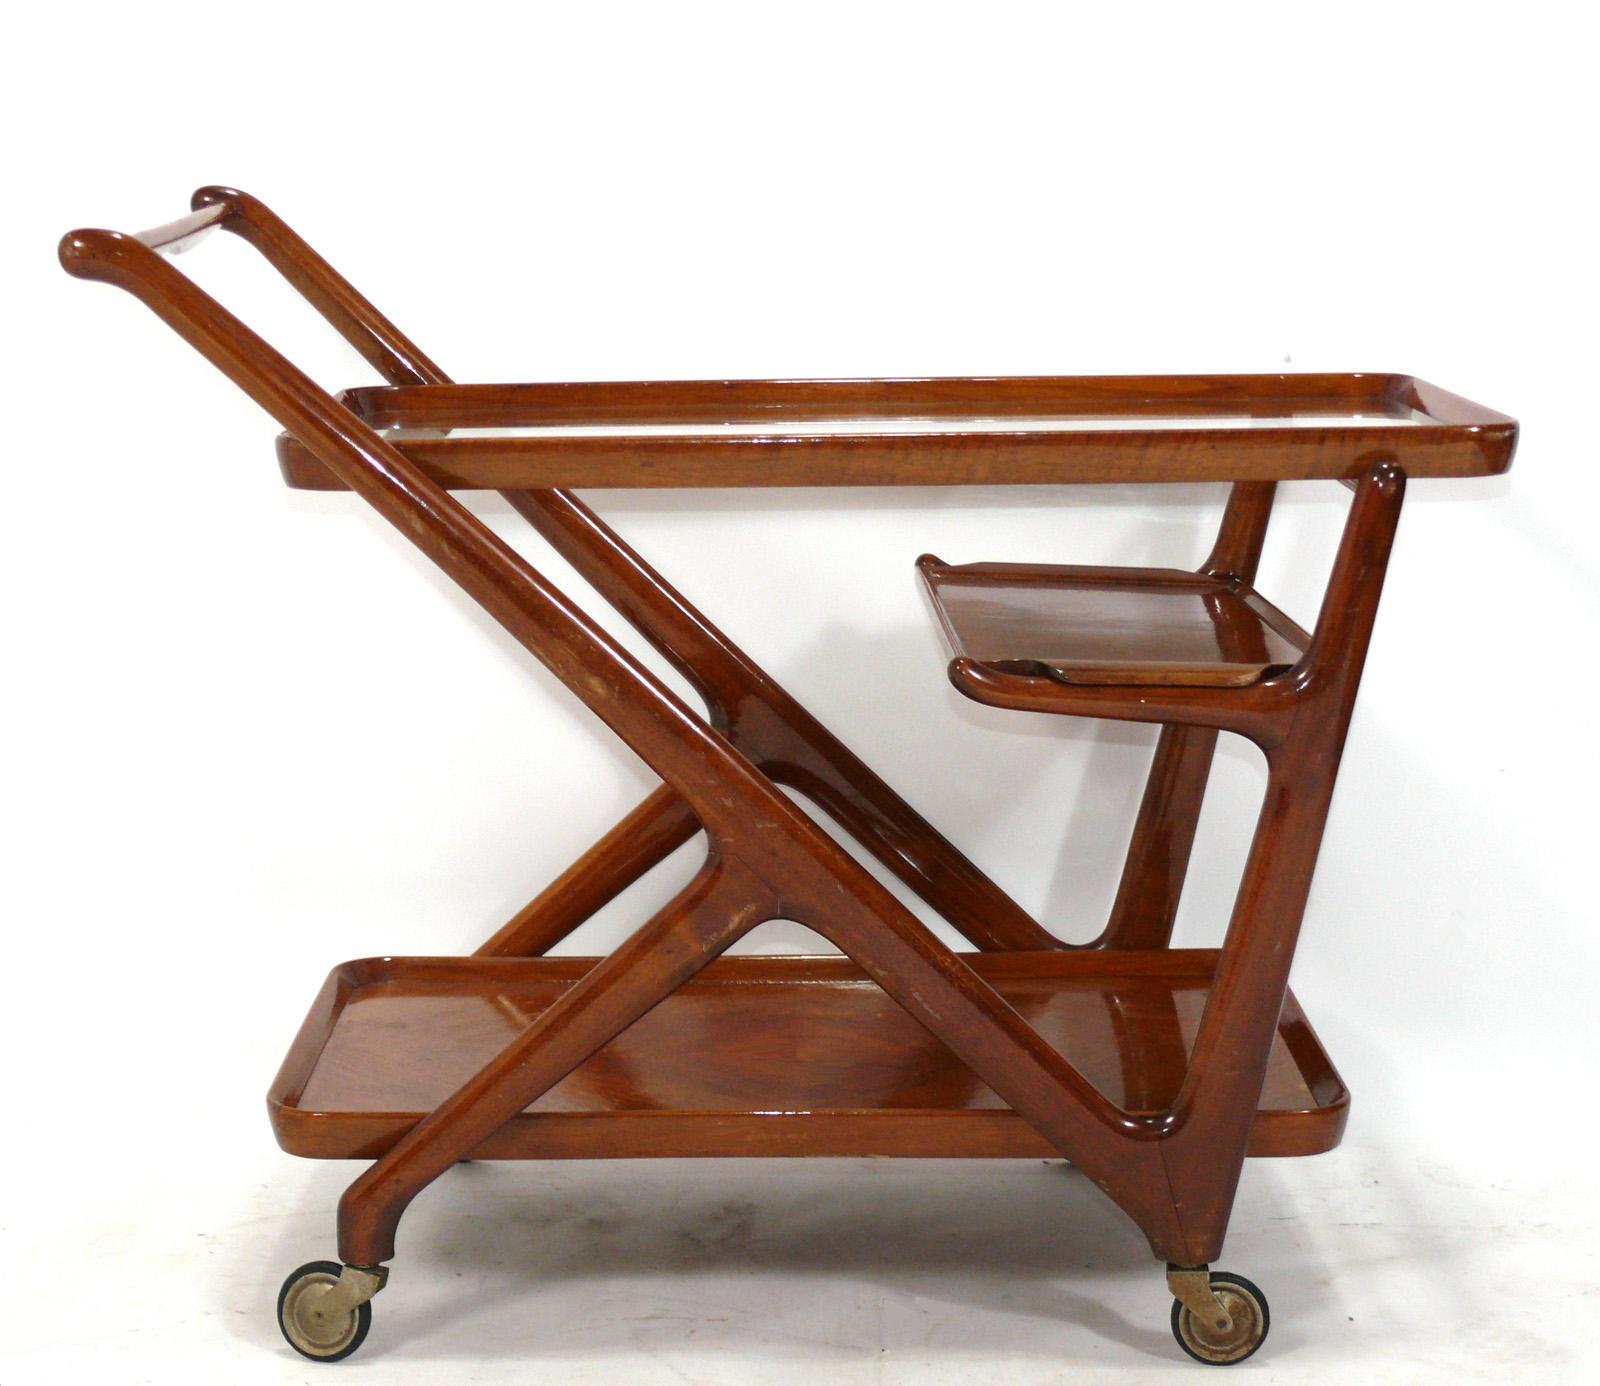 Sculptural Italian Bar Cart, designed by Cesare Lacca, Italy, circa 1950s. It is constructed of beautifully grained wood and has a removable tray.